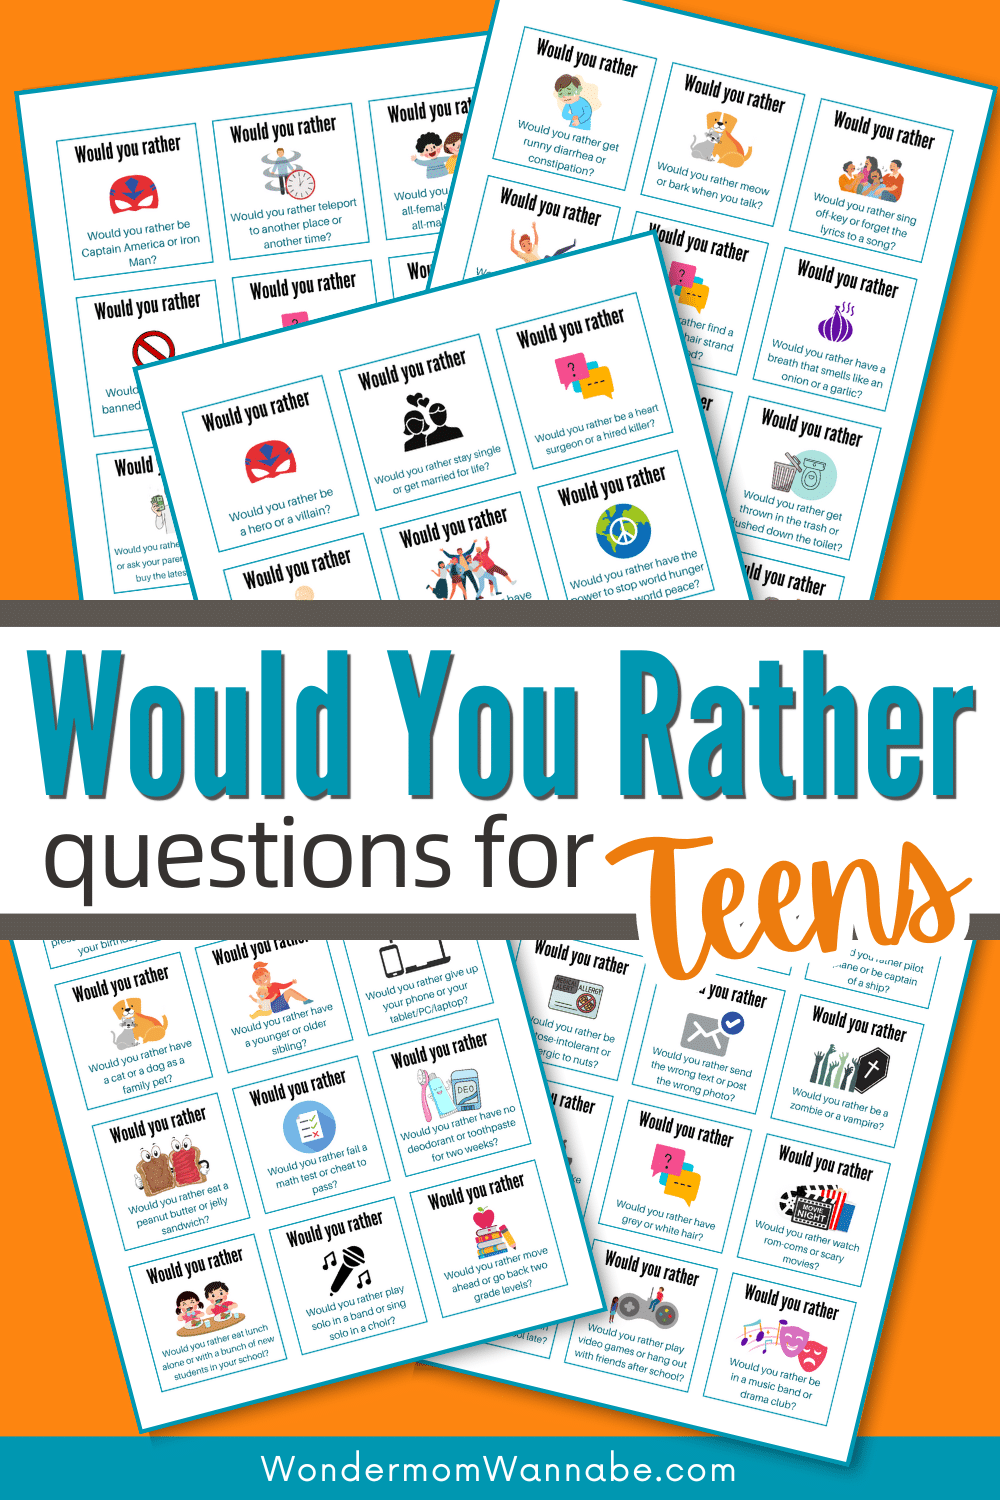 250+ Funny Would You Rather Questions for Kids, Teens and Adults